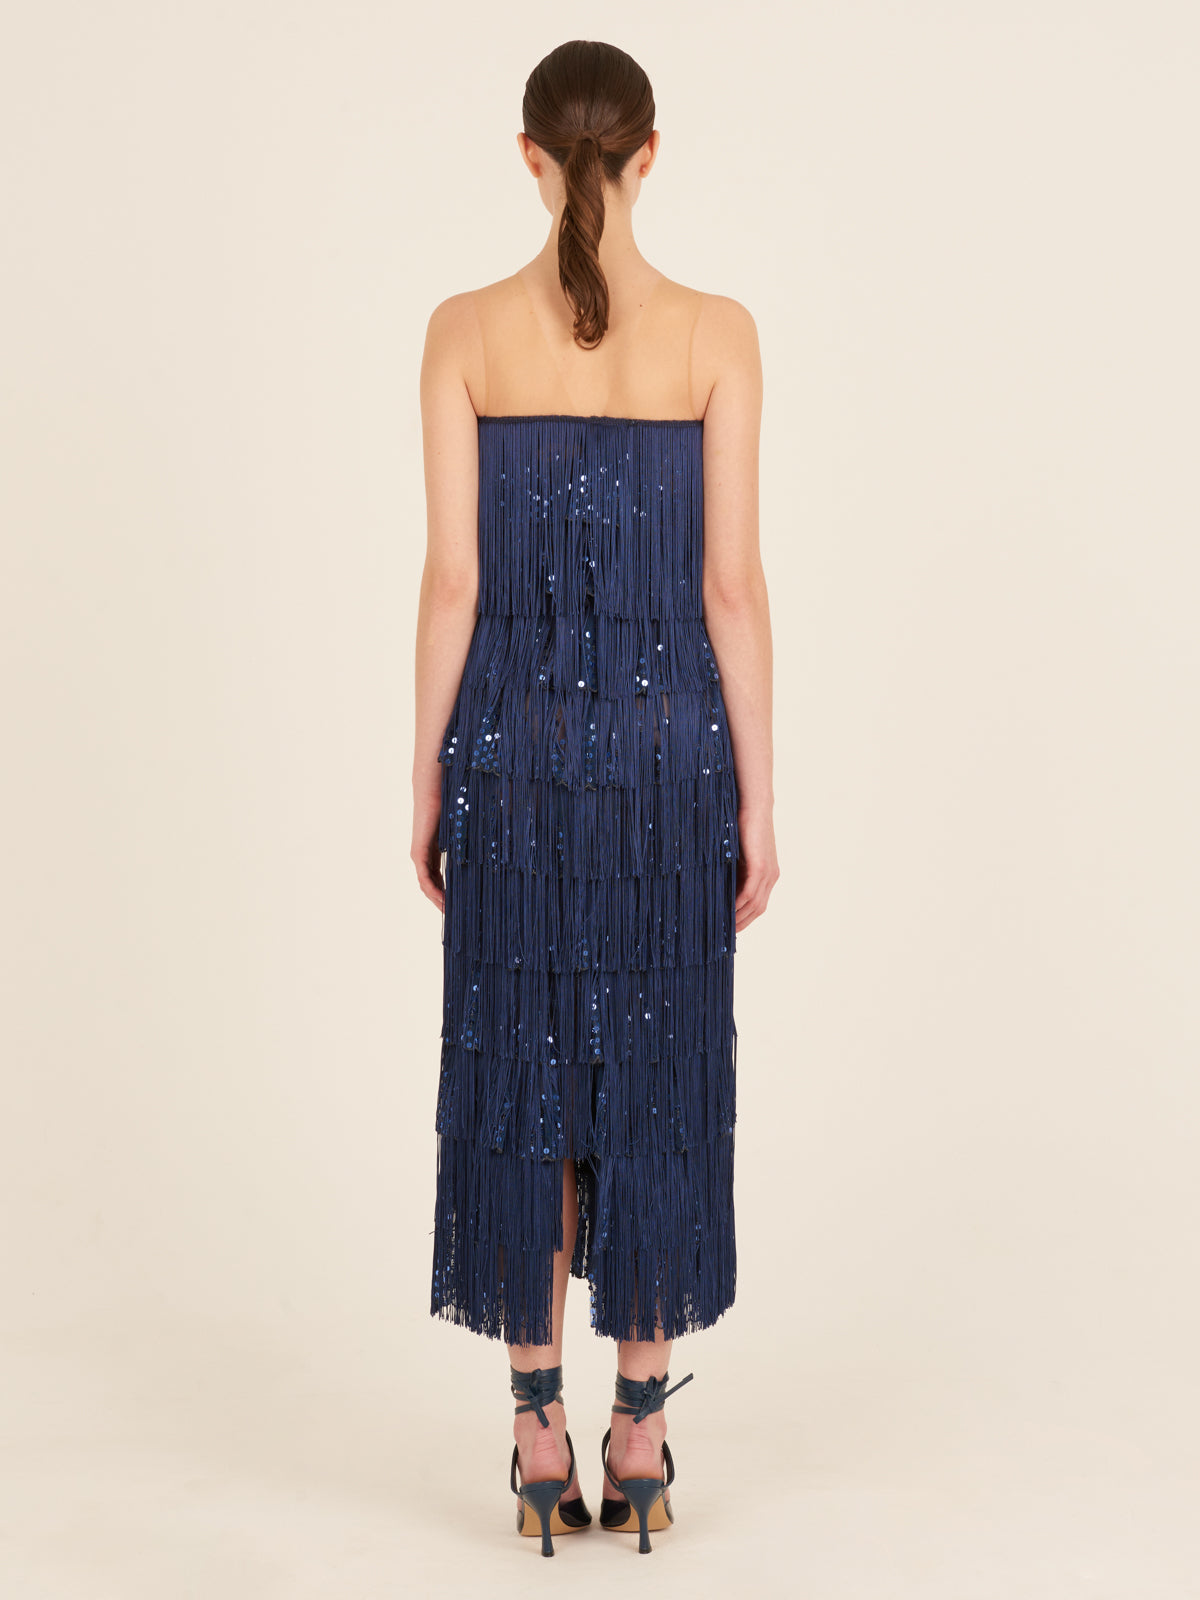 A Salome Dress Navy with fringes and sequins.